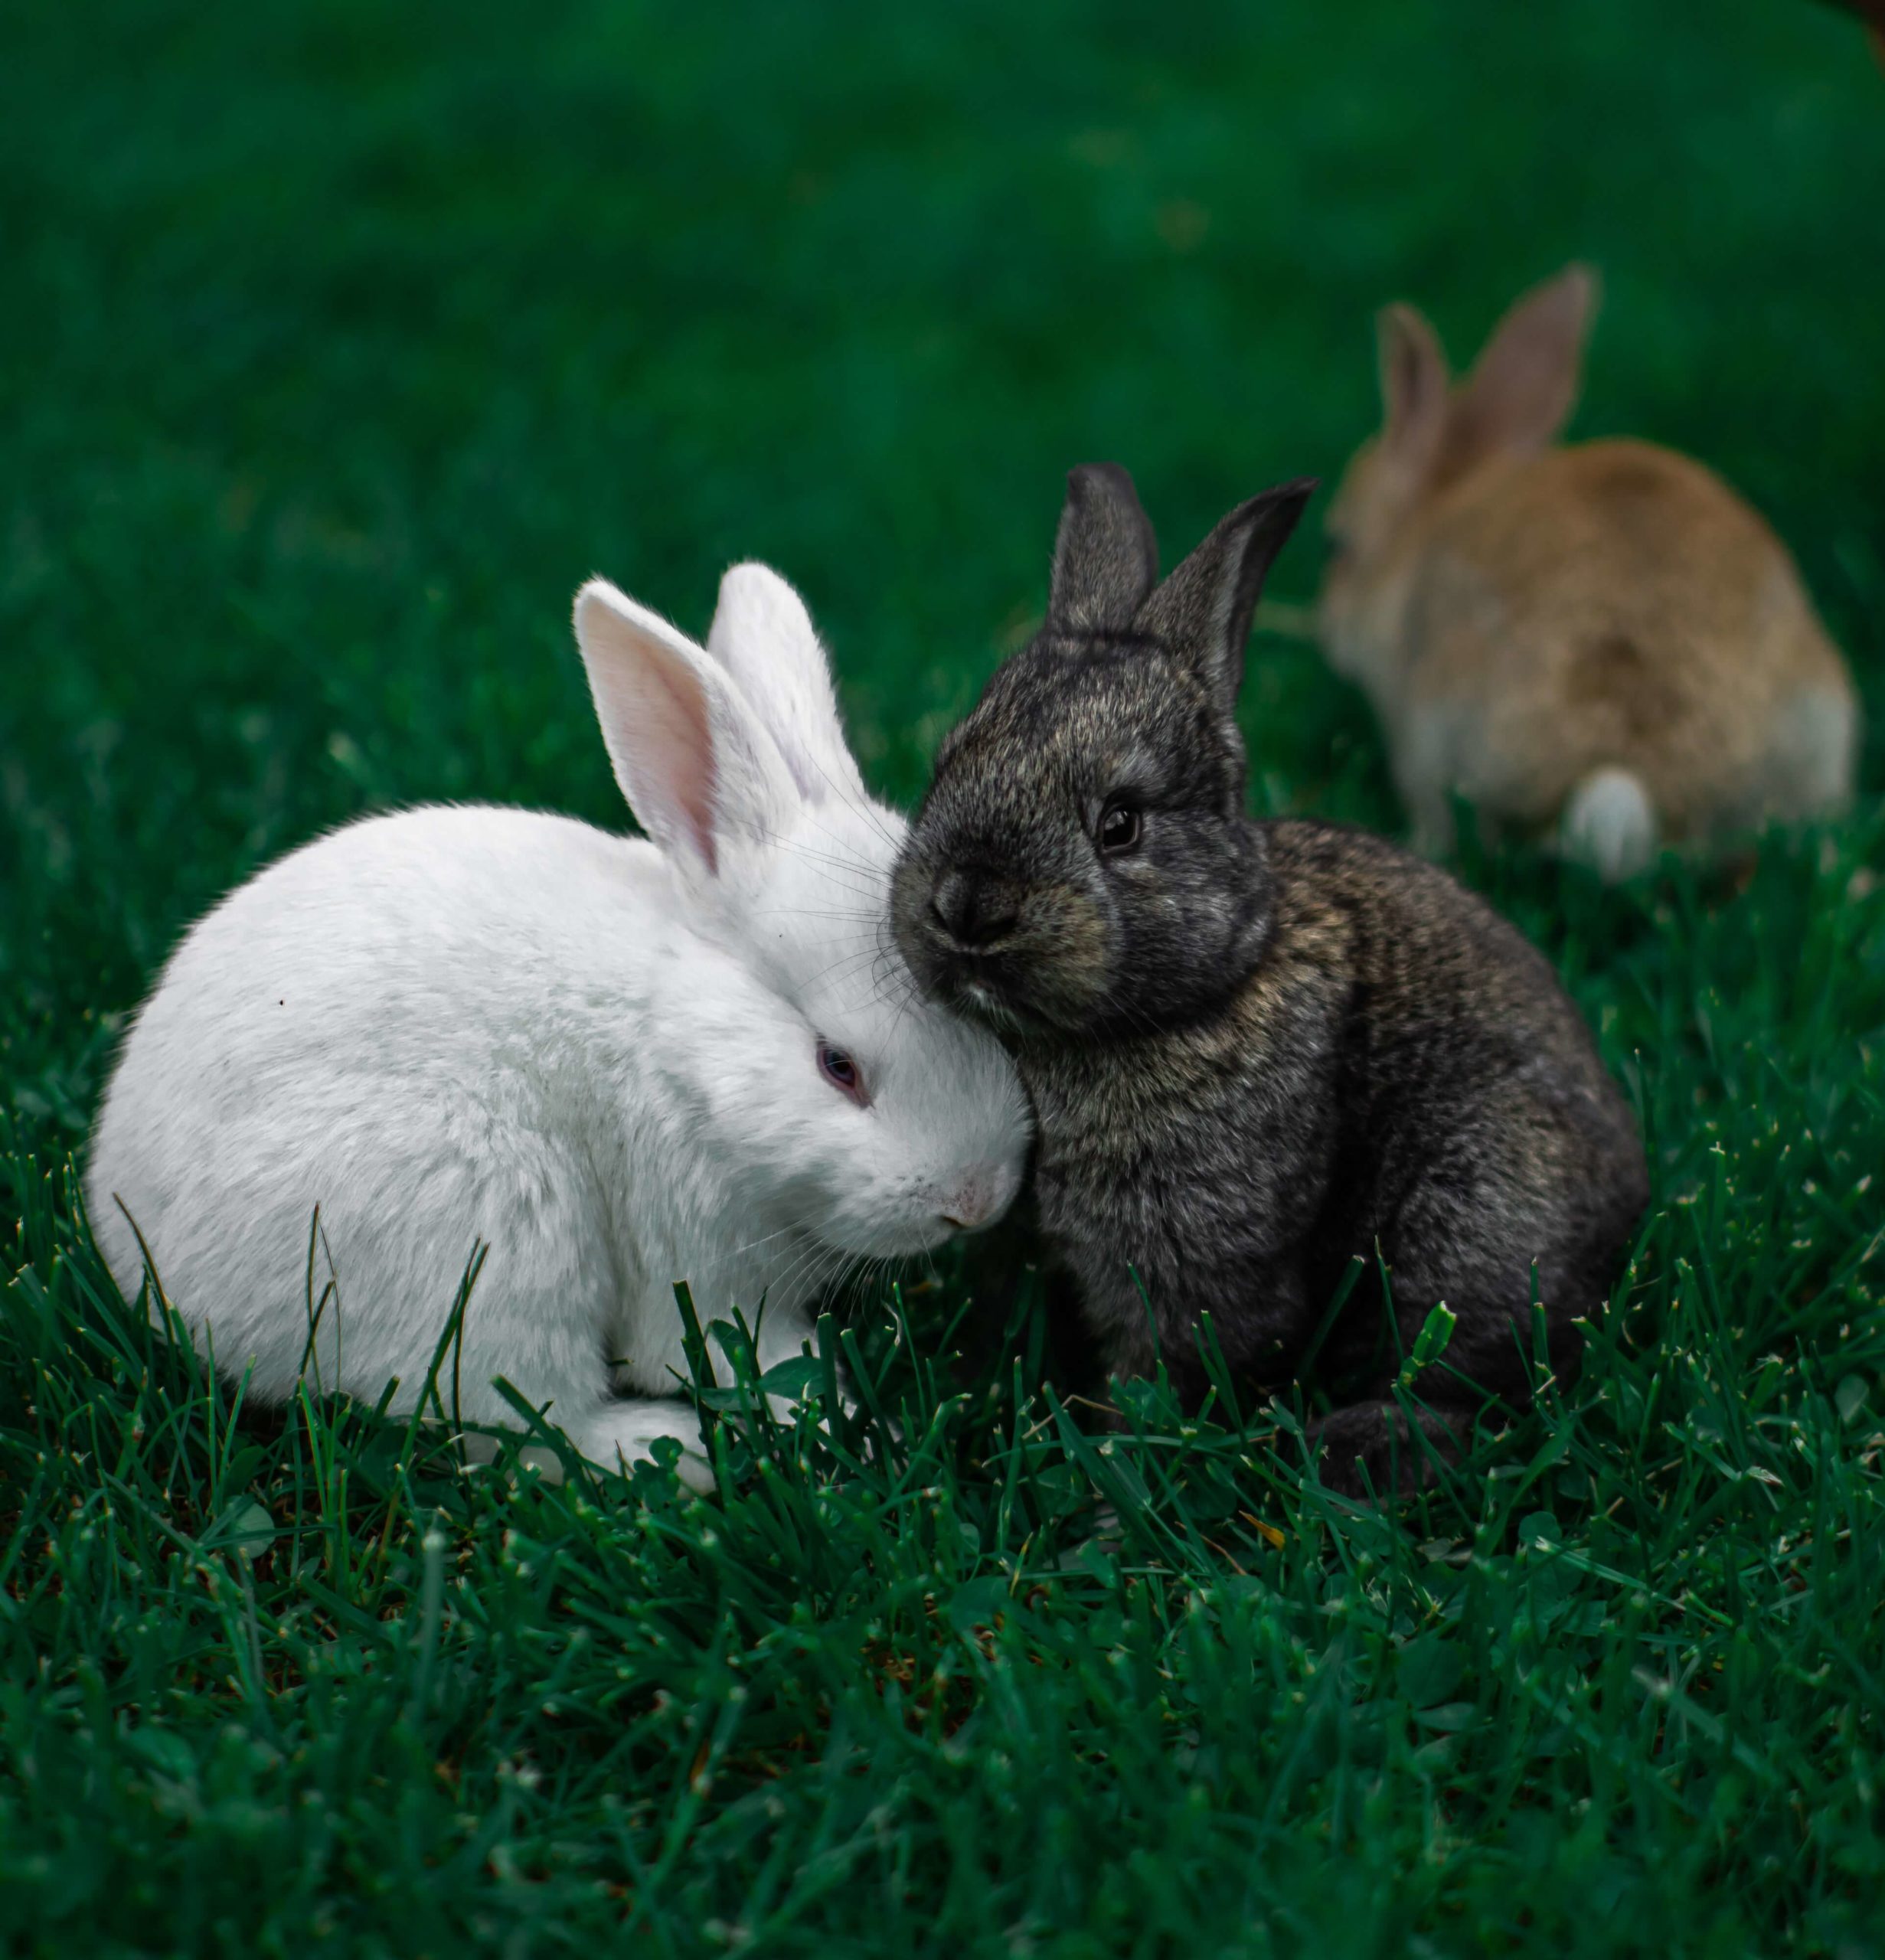 A picture of rabbits - what does their poop look like?